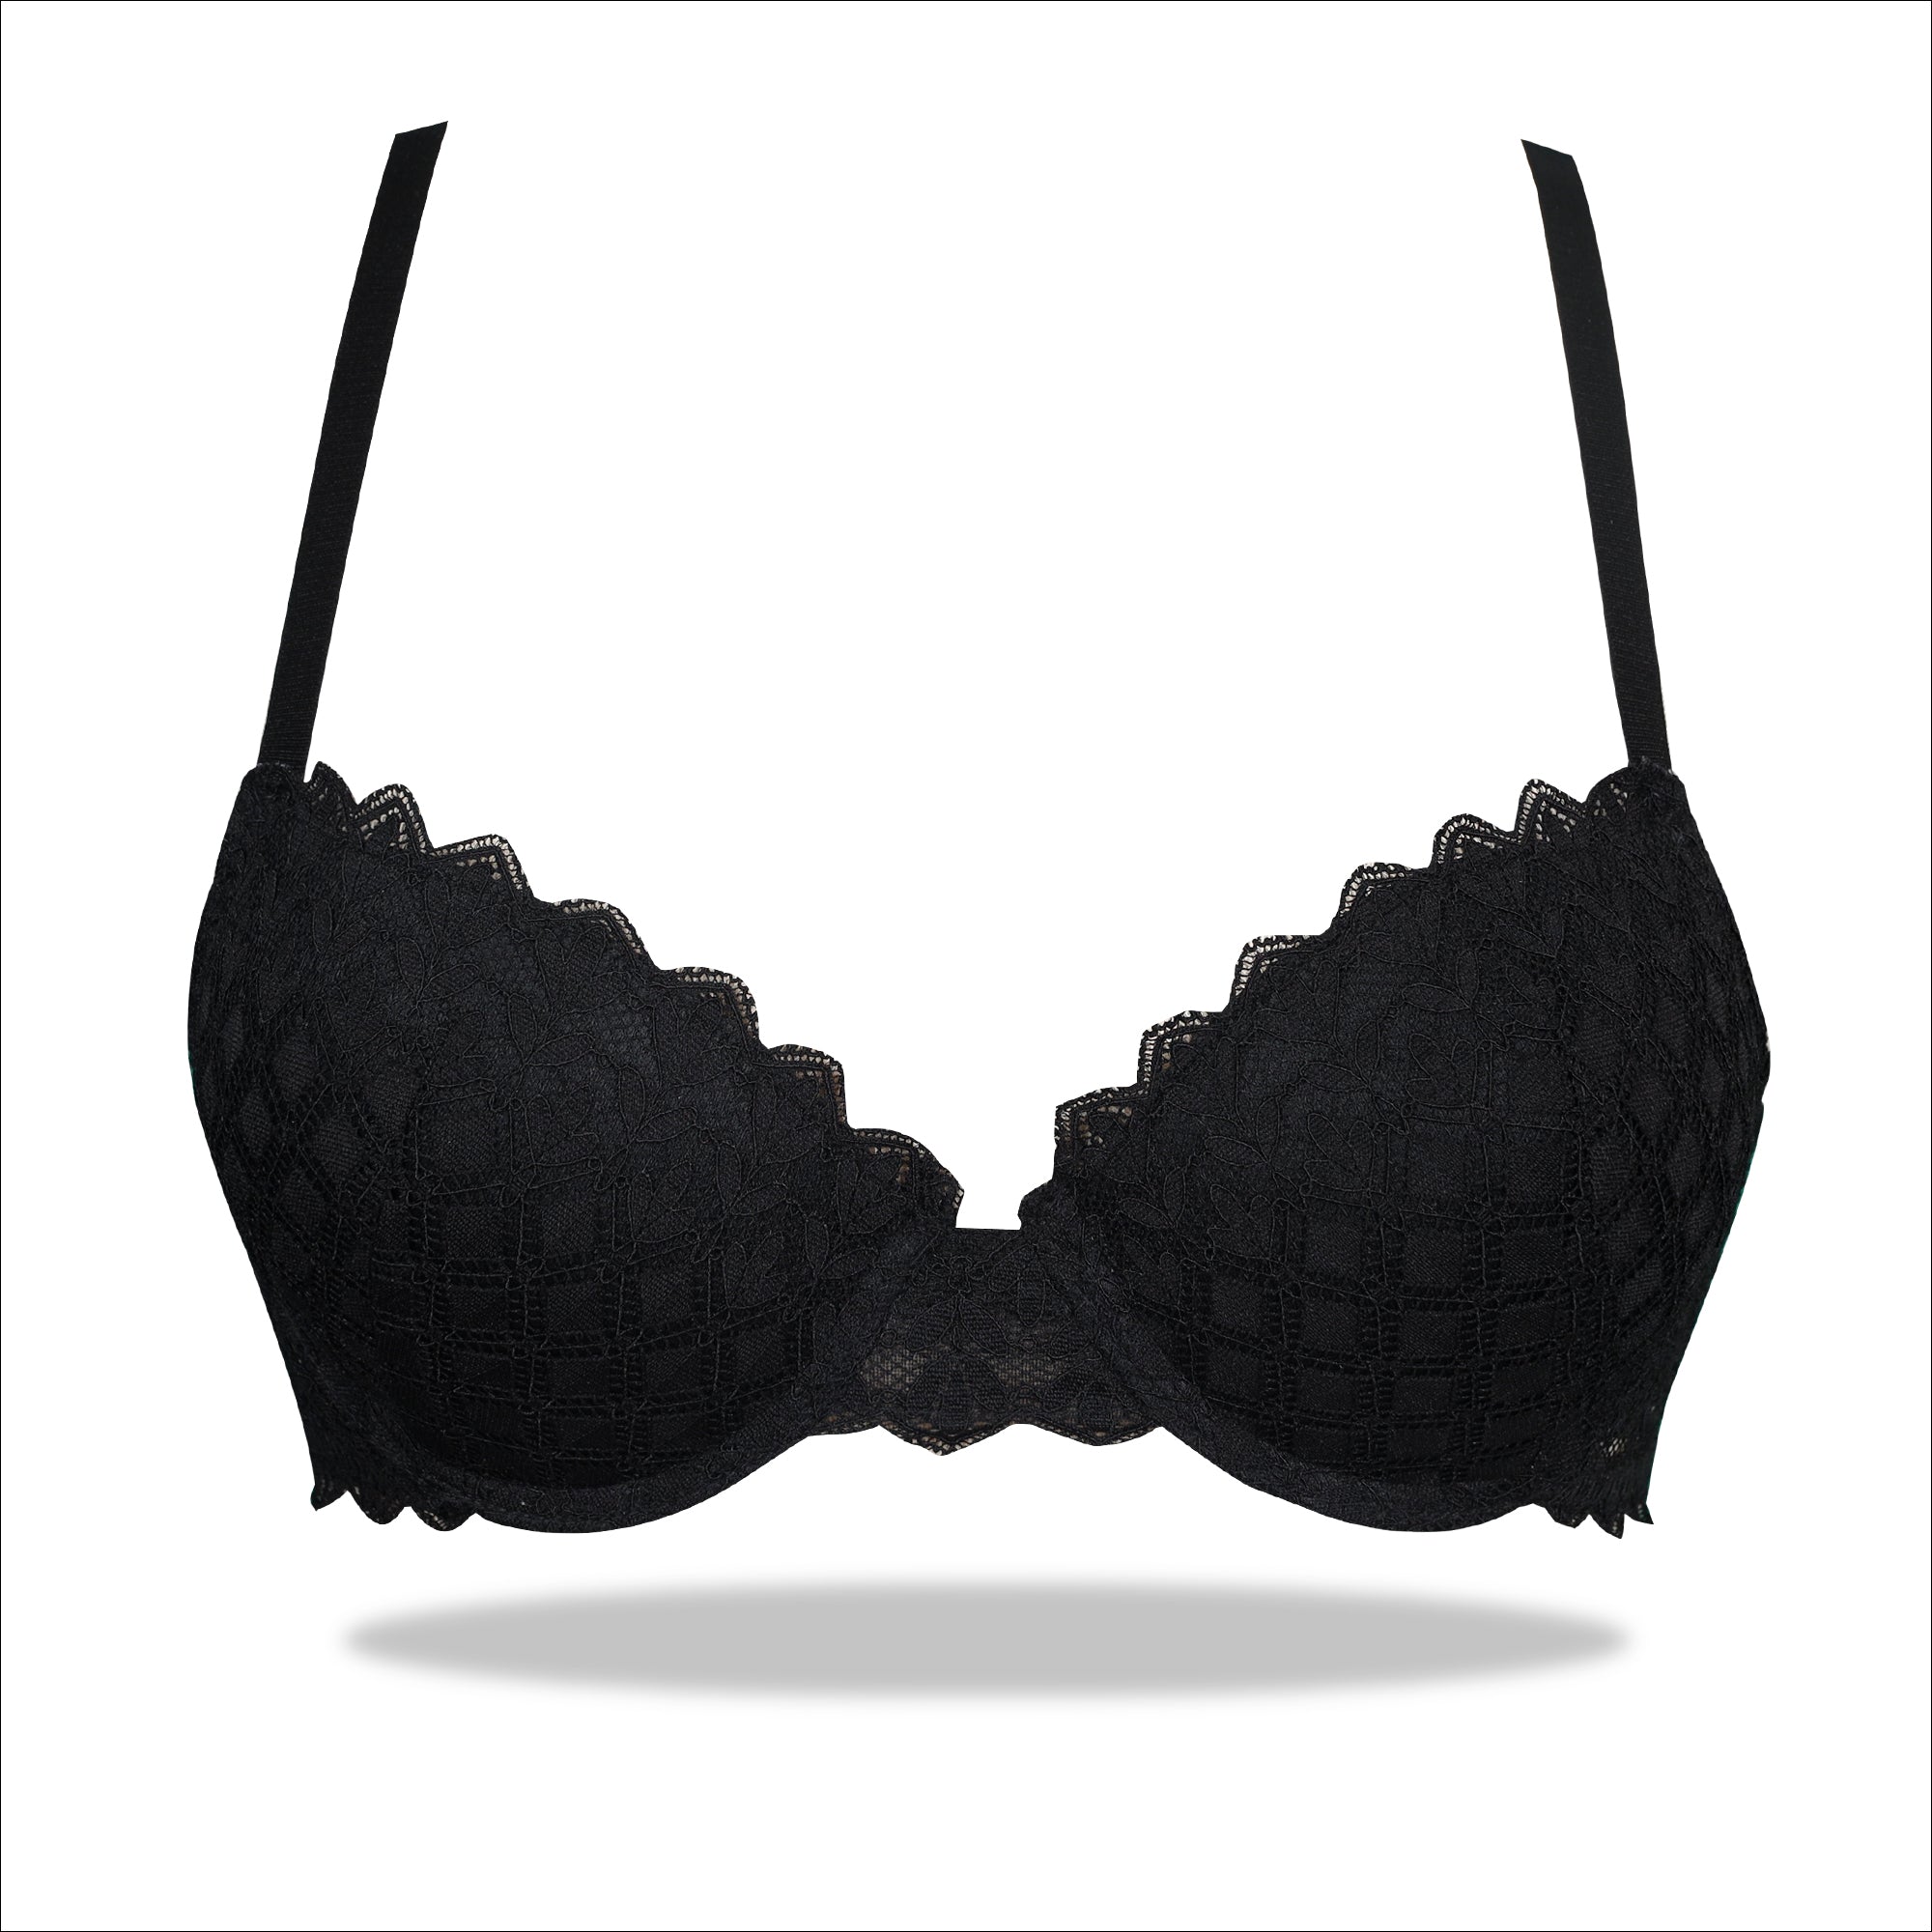 Buy Imported Padded Bras For Women at Lowest Price in Pakistan